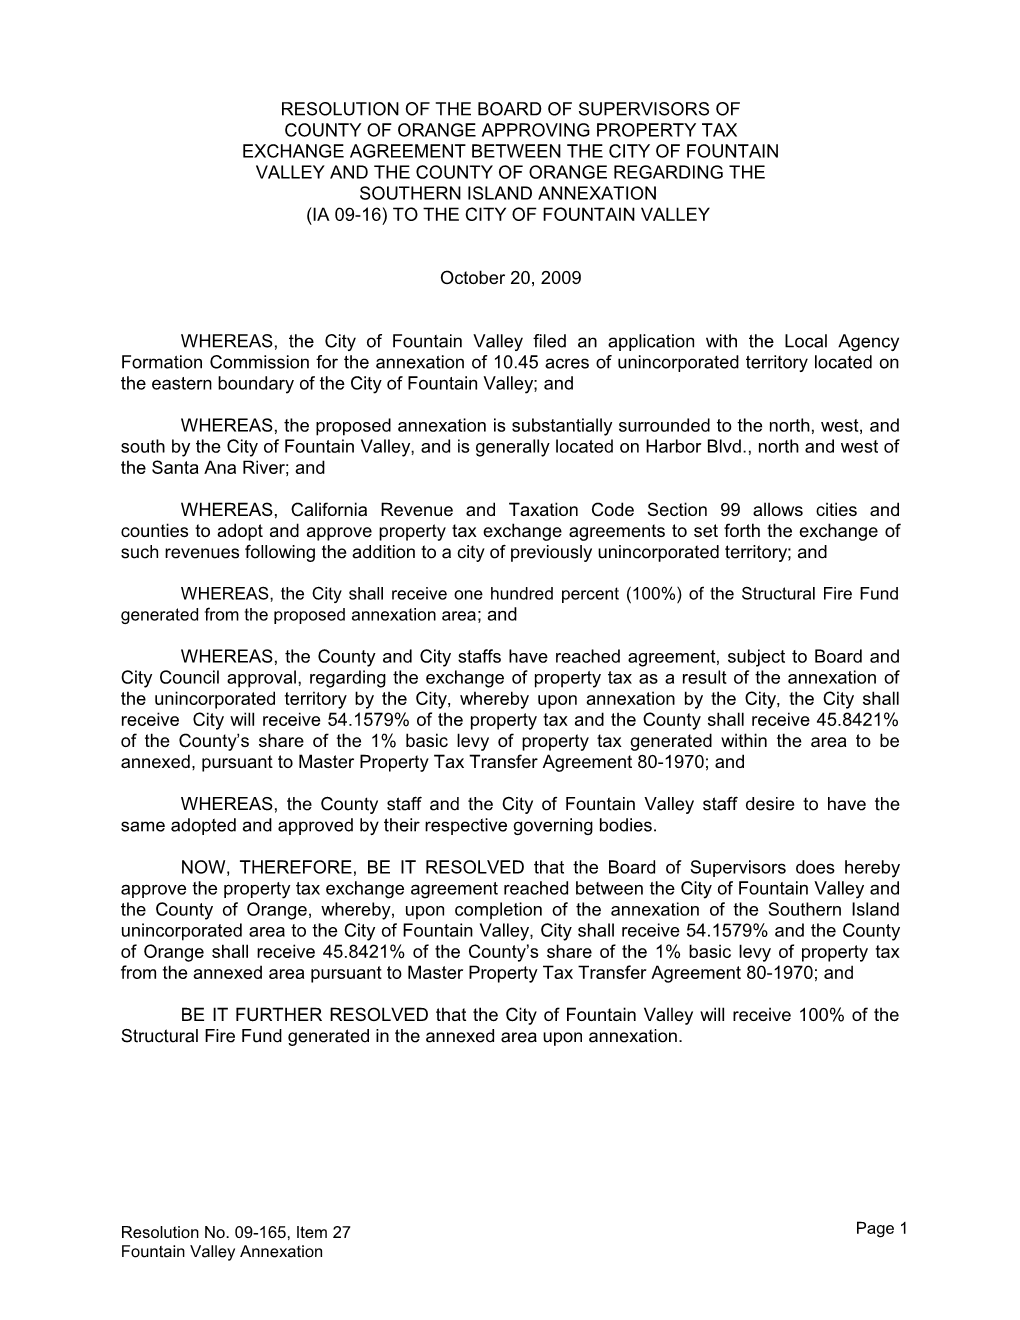 Resolution of the Board of Supervisors of County of Orange Approving Property Tax Exchange